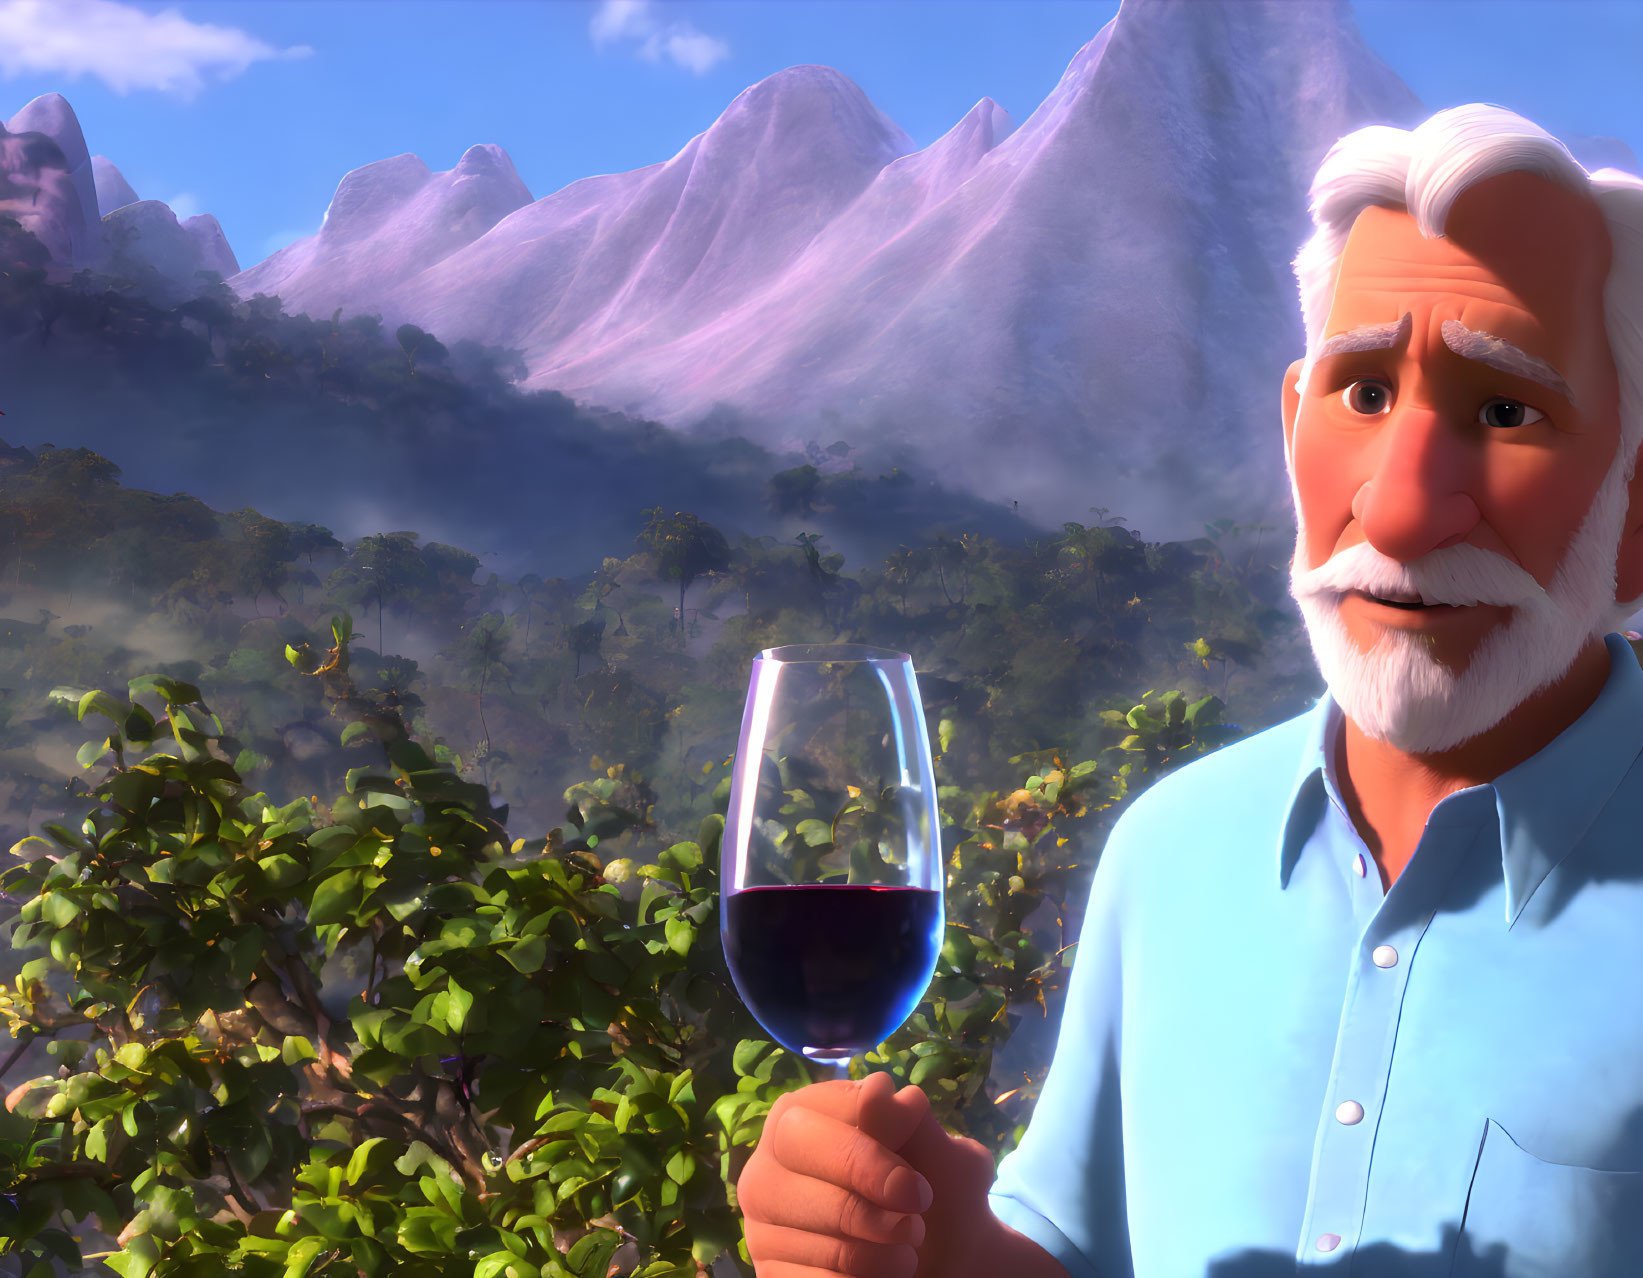 Elderly man with white hair holding red wine glass in scenic landscape